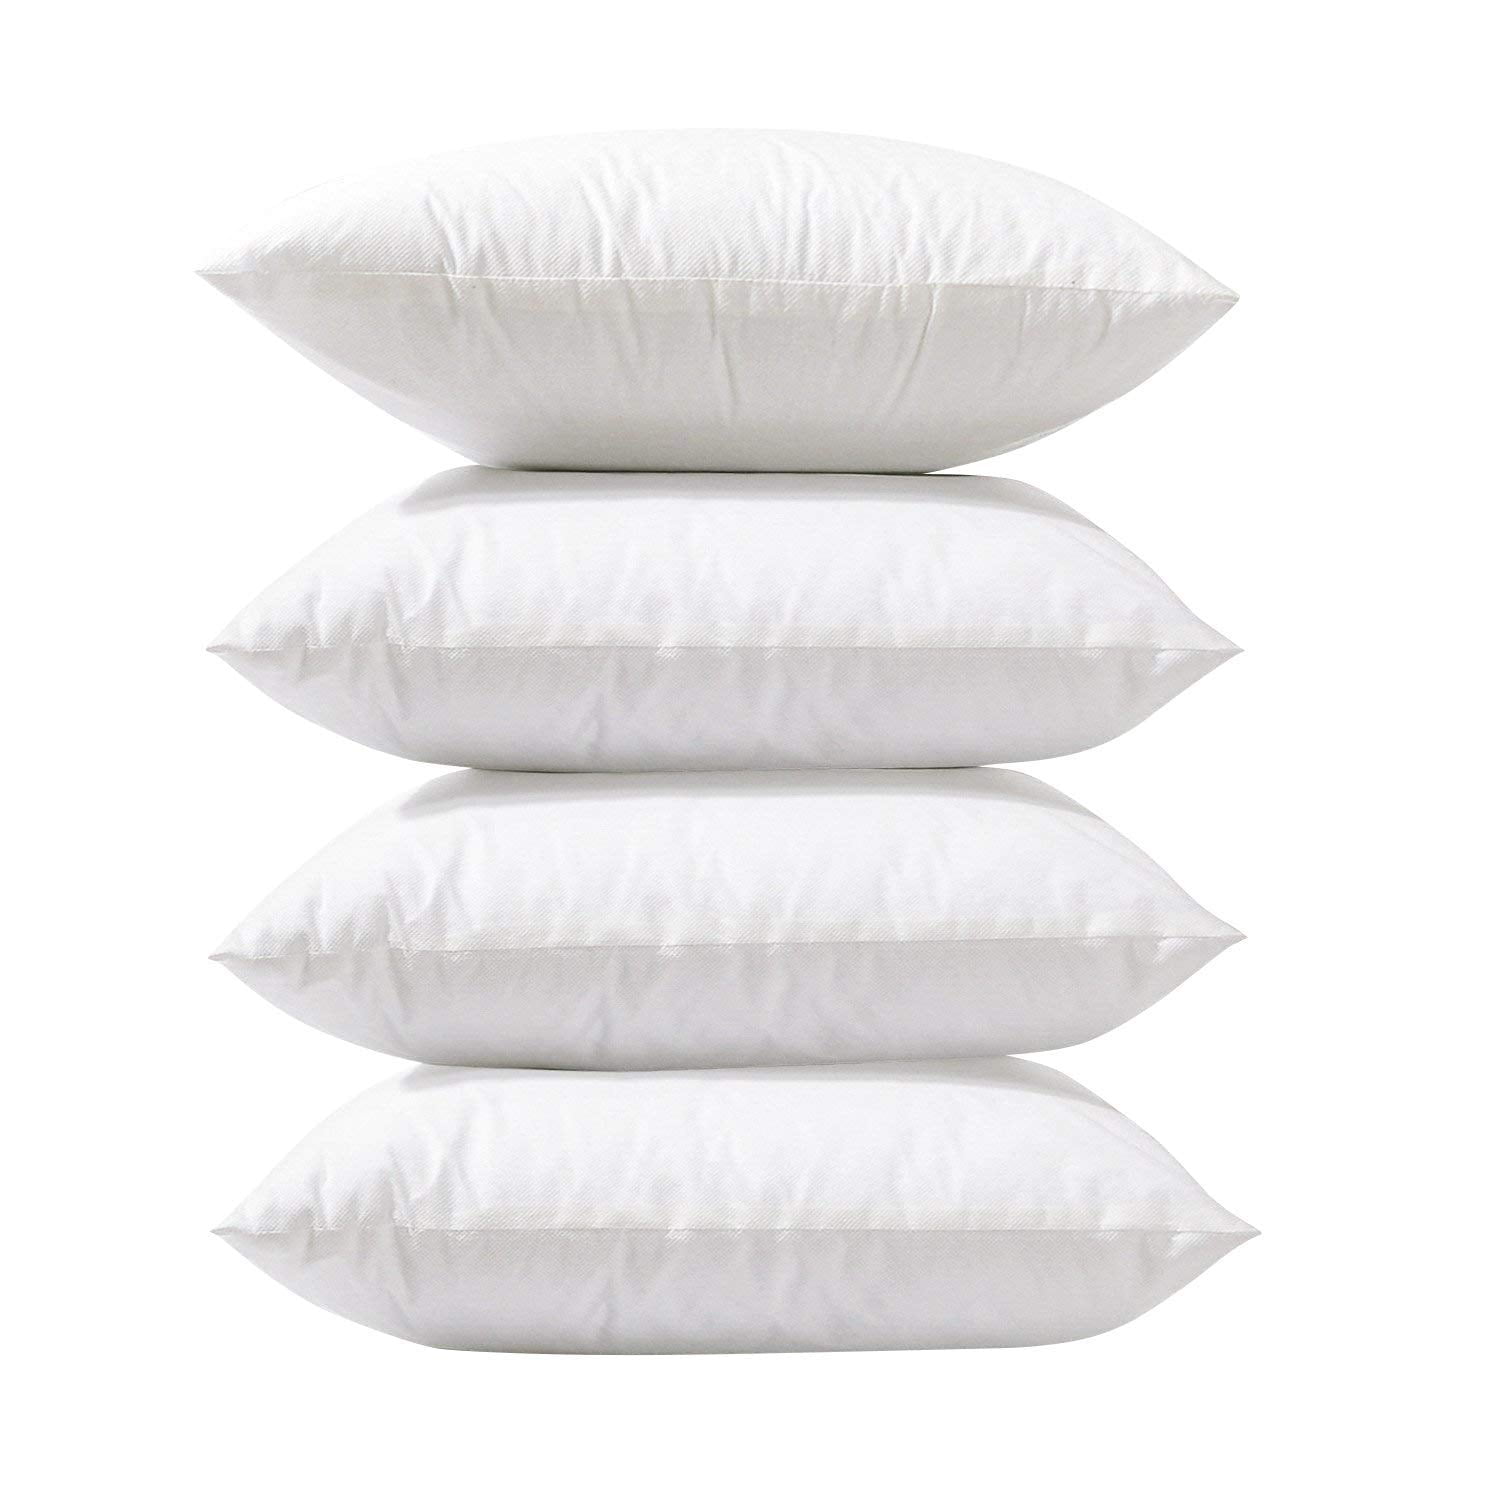  Twinkle Fluff White Polyester - 5 oz. (1 Pc)  Ultra Soft,  Luxurious Pillow/Craft Stuffing - Perfect for DIY Projects and Cushion  Filling : Home & Kitchen